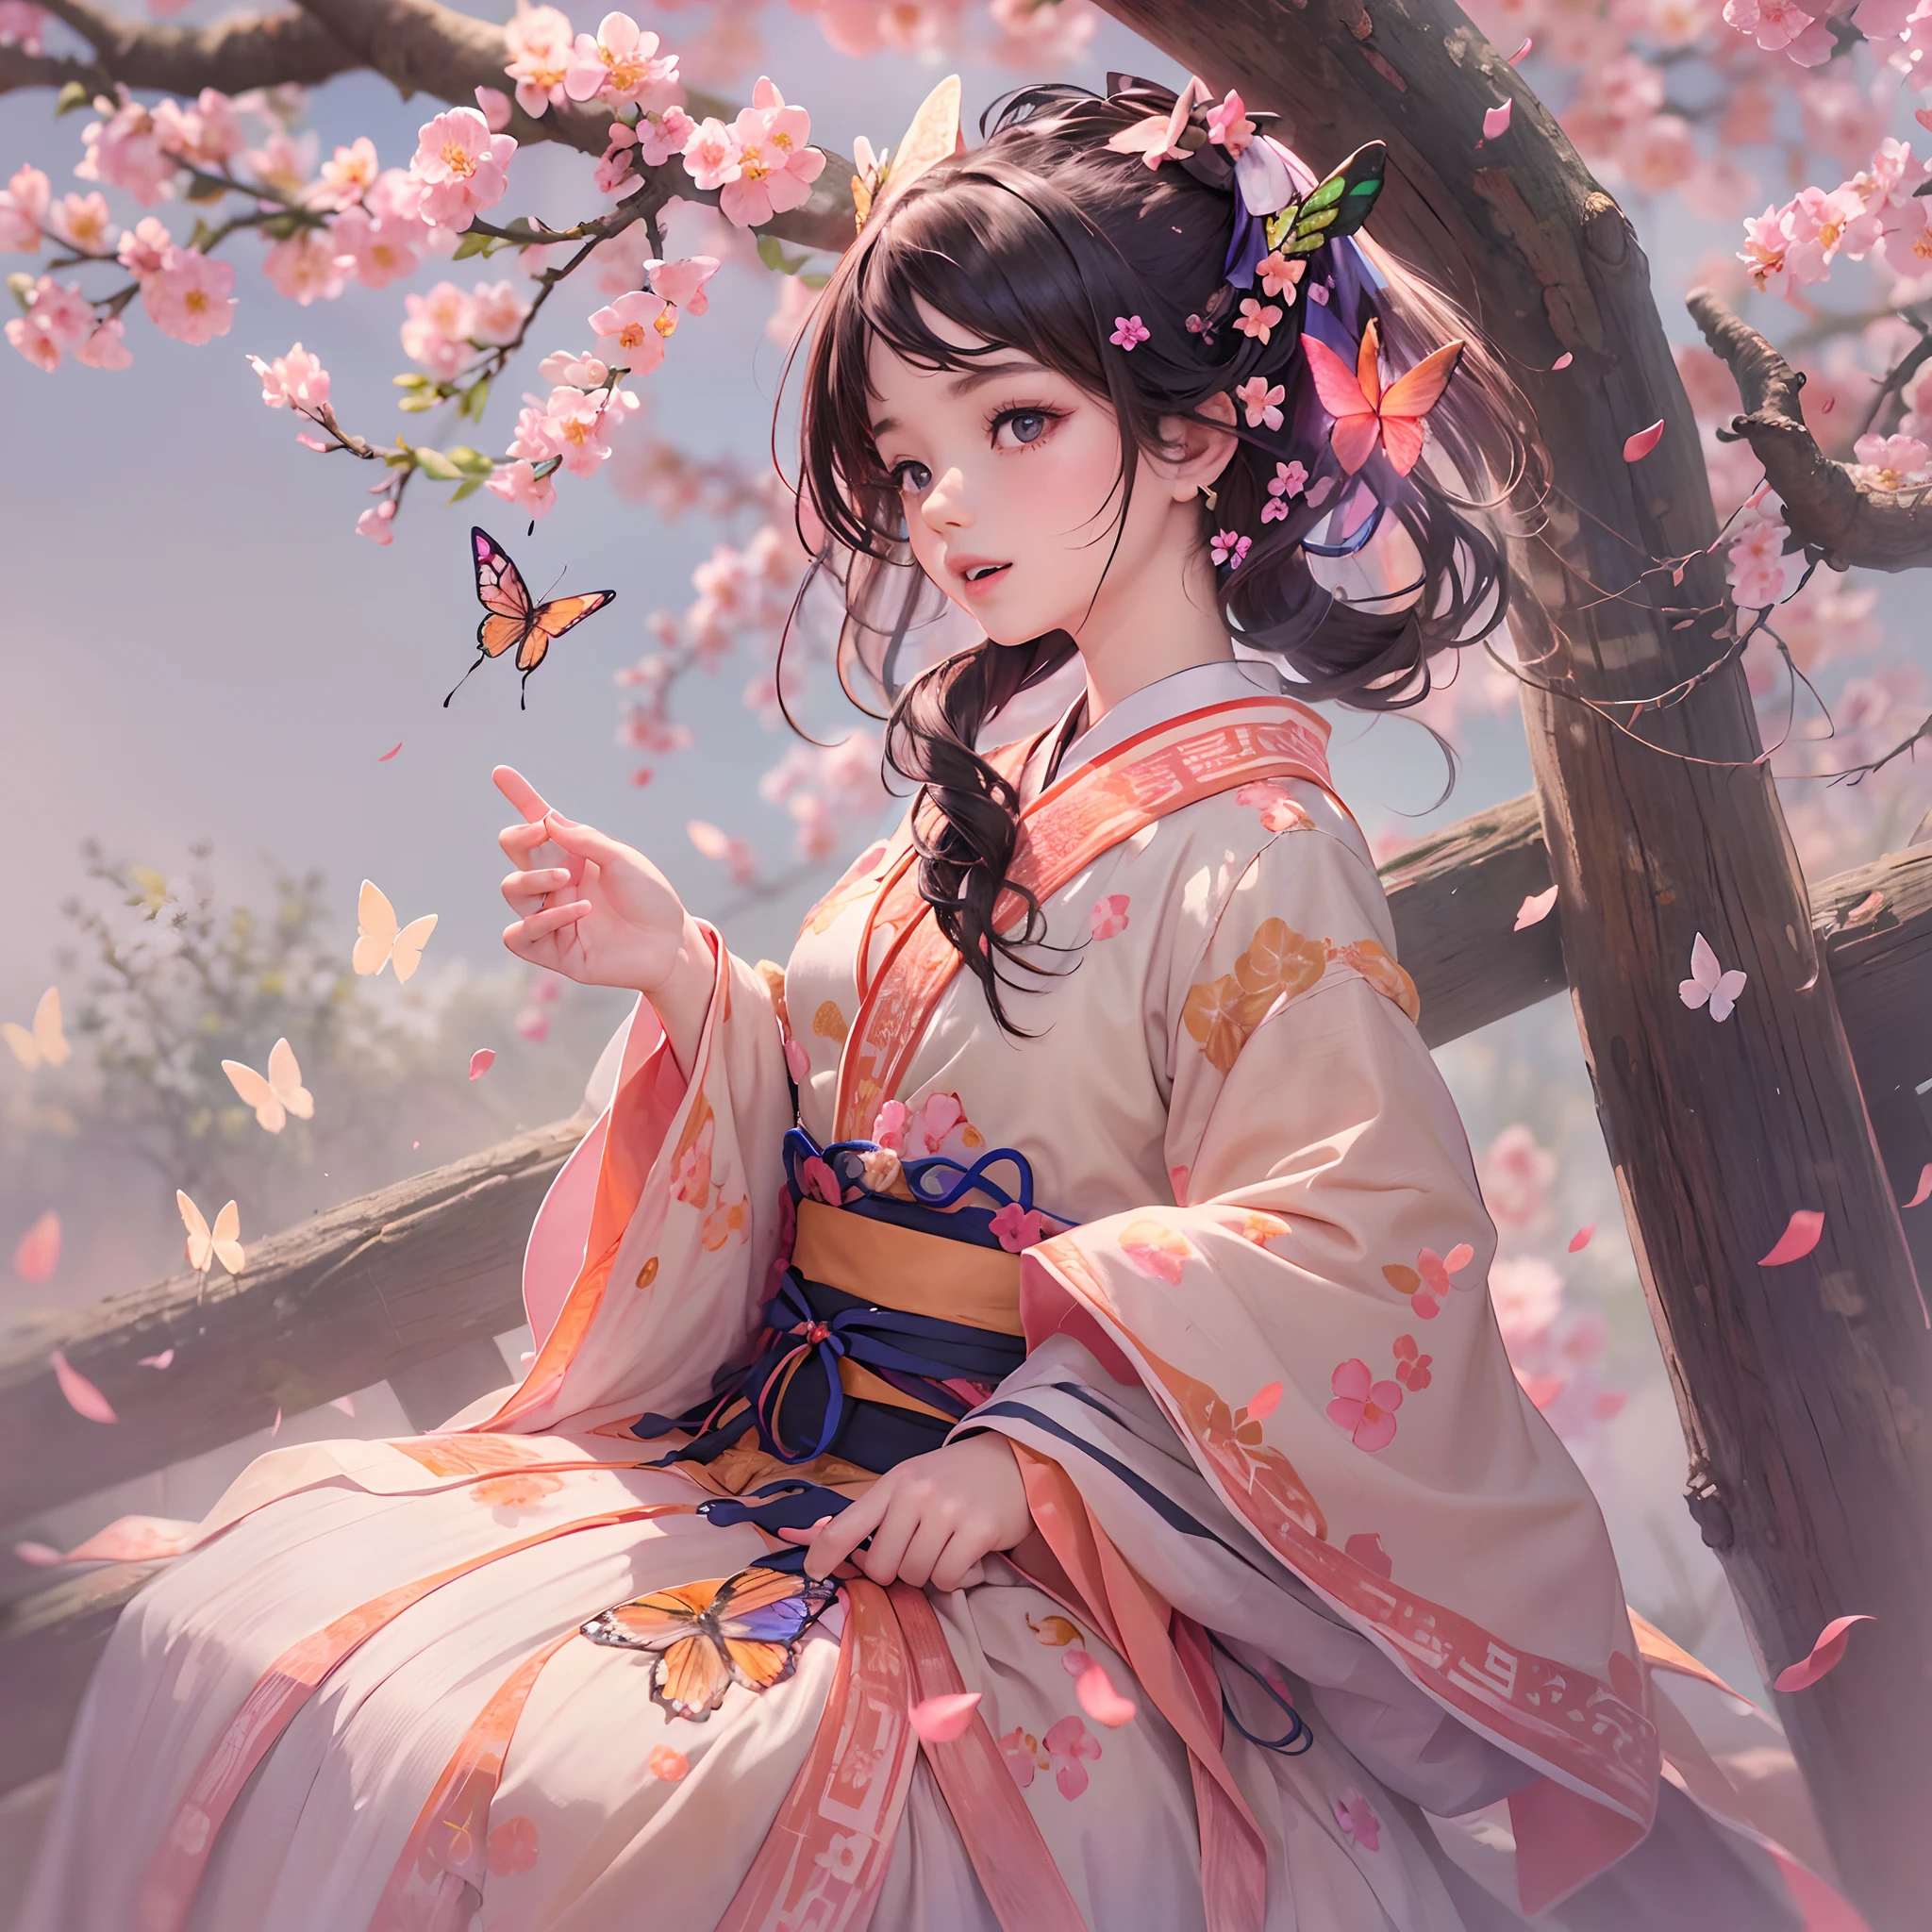 (In a garden full of peach blossoms),(Masterpiece peach blossom),Peach blossoms fall,a little lovely kid girl,anatomy correct,wearing a hanfu,Delicate facial features,The skin is delicate and rosy,Black colored eyes,with short black hair,Tie your hair into a bun,happy laughing,earnest,(Look at a butterfly in the flower:1.4),(tmasterpiece,plethora of colors,Best quality,Cinematic lighting effects),A high resolution,high detal,(illustratio,3Drenderingof)